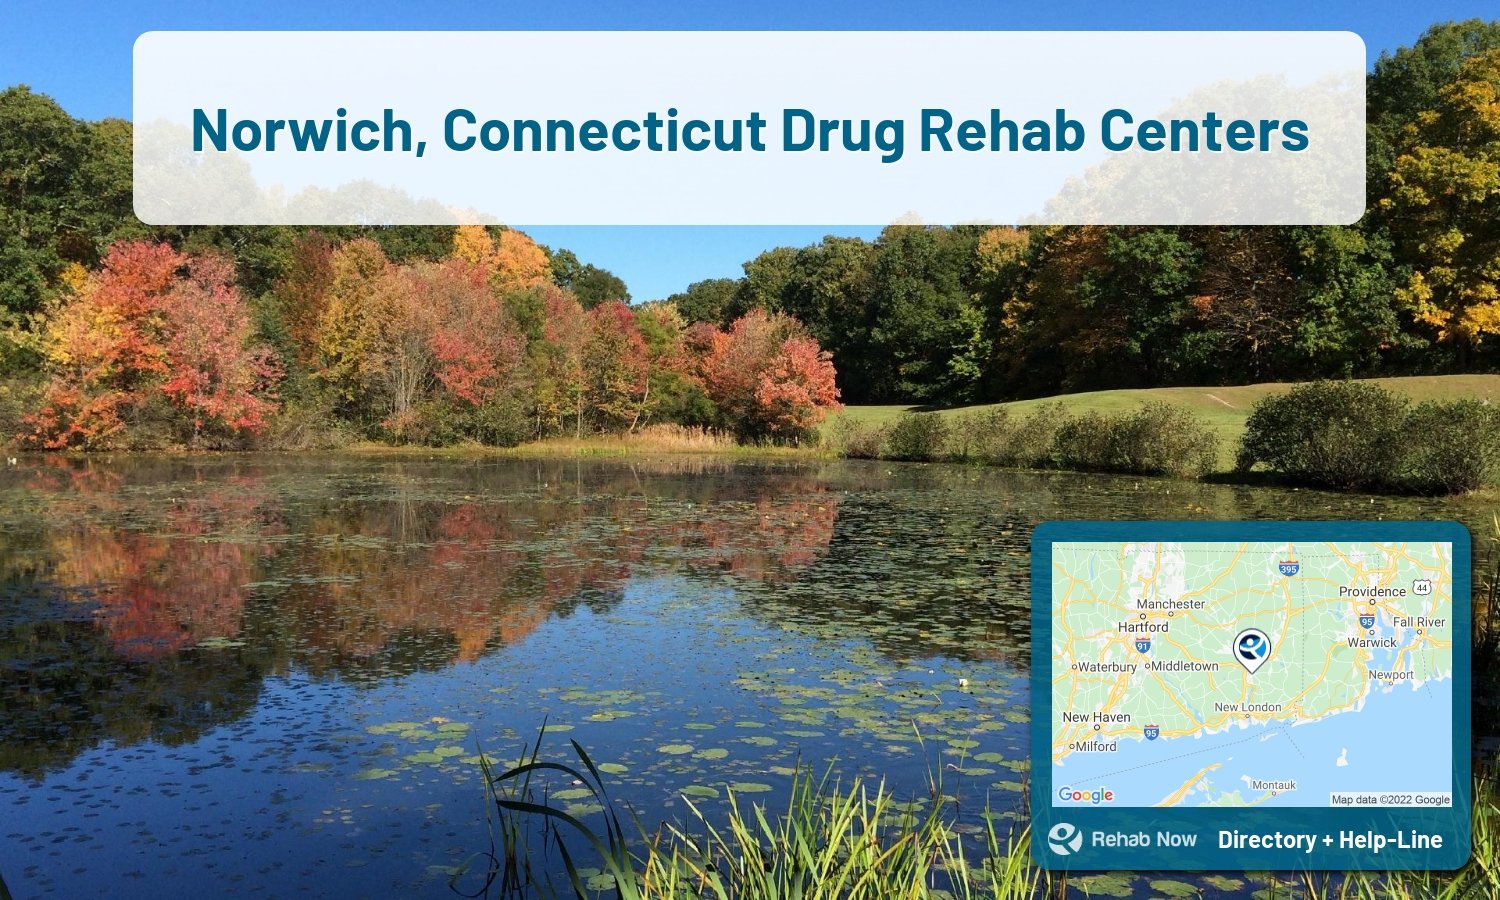 Norwich, CT Treatment Centers. Find drug rehab in Norwich, Connecticut, or detox and treatment programs. Get the right help now!